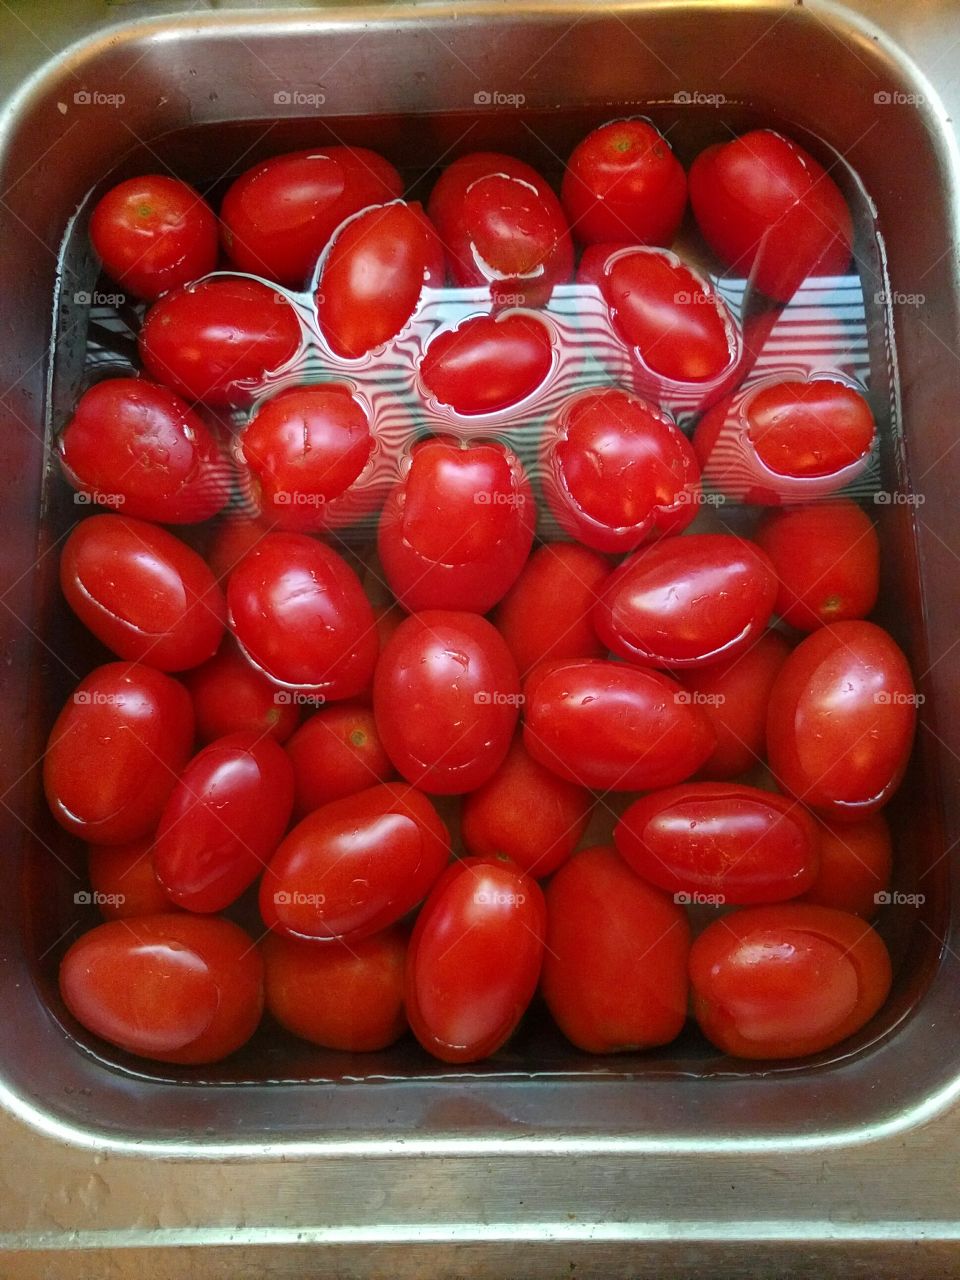 Rinsing Tomatoes in a Sink